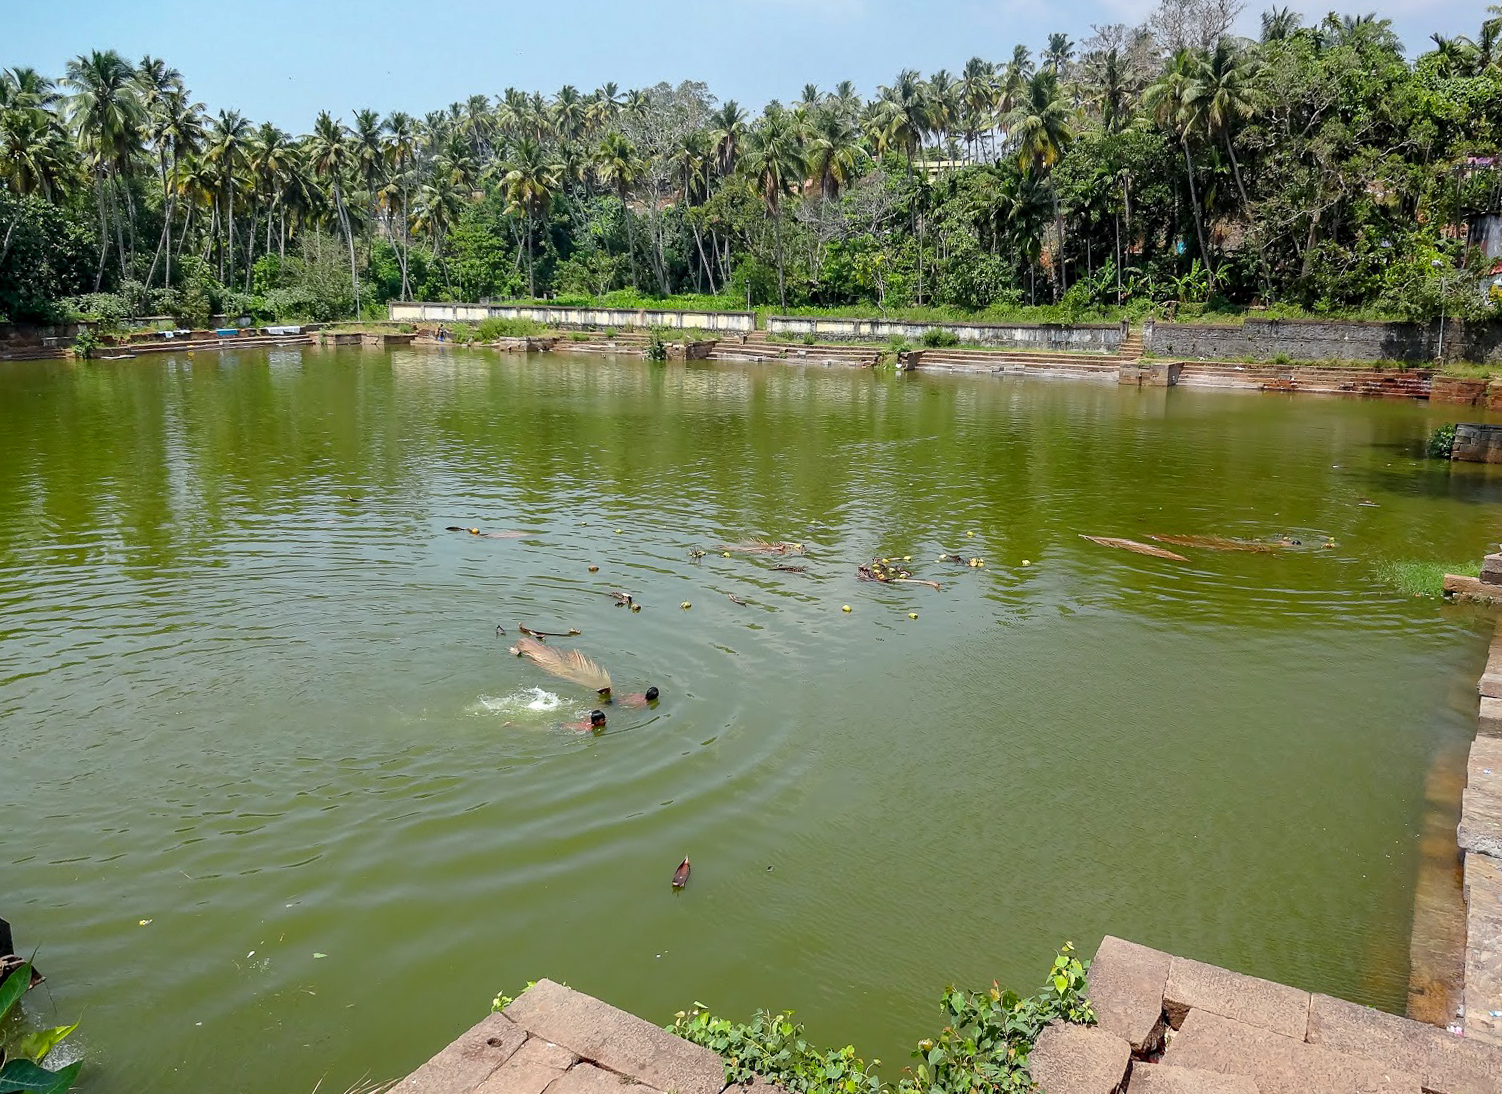 coconuts and plam leaves float in the green water of Janardanaswamy Temple pond, Varkala, Kerala, India